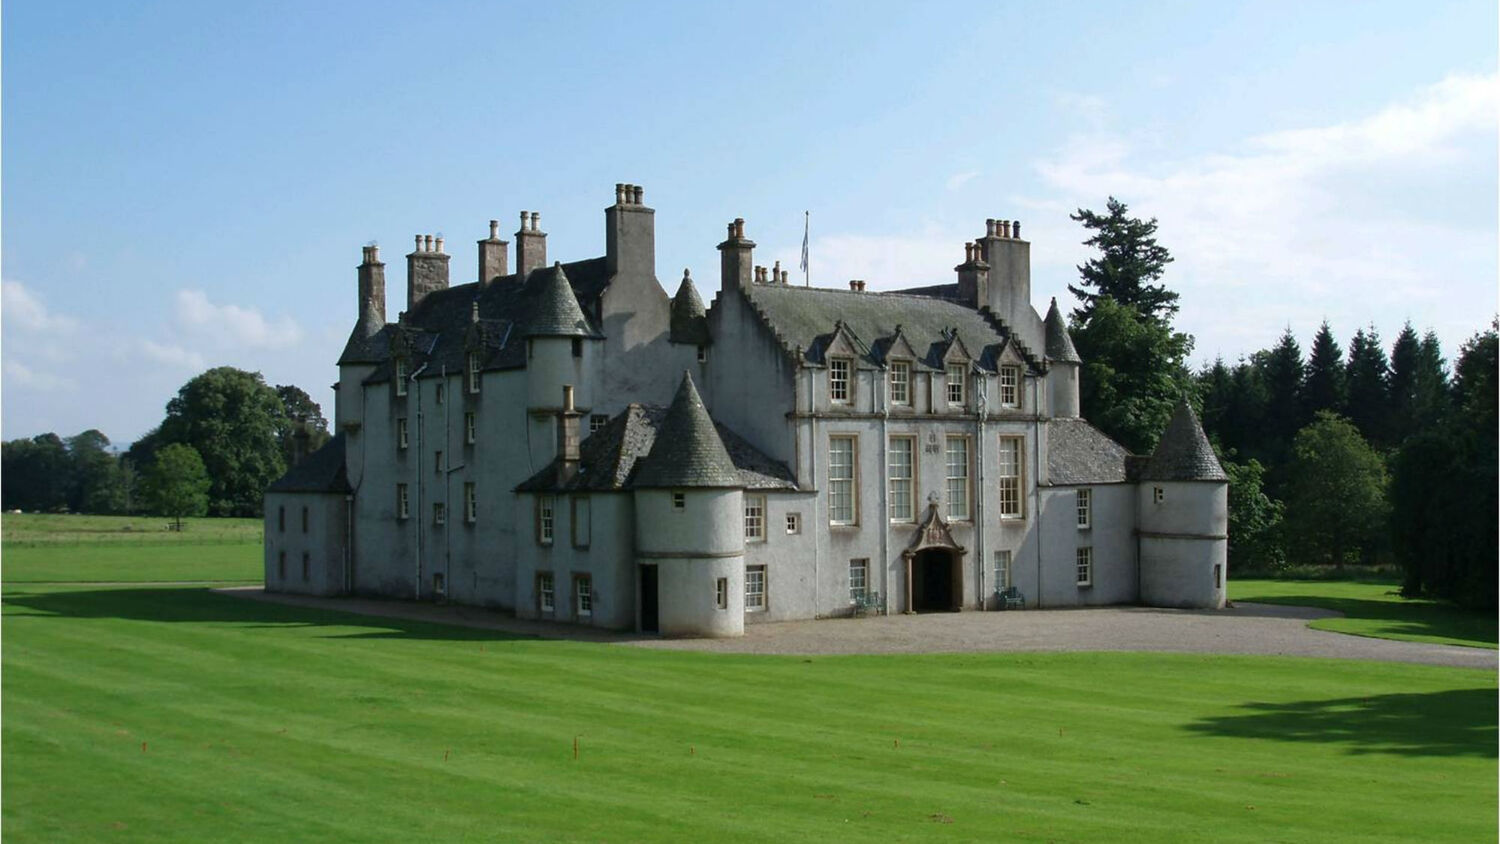 A view of the exterior of Leith Hall, from across some manicured lawns. It is a large stately home, with grey walls and a slate roof, with little towers and turrets at each corner.